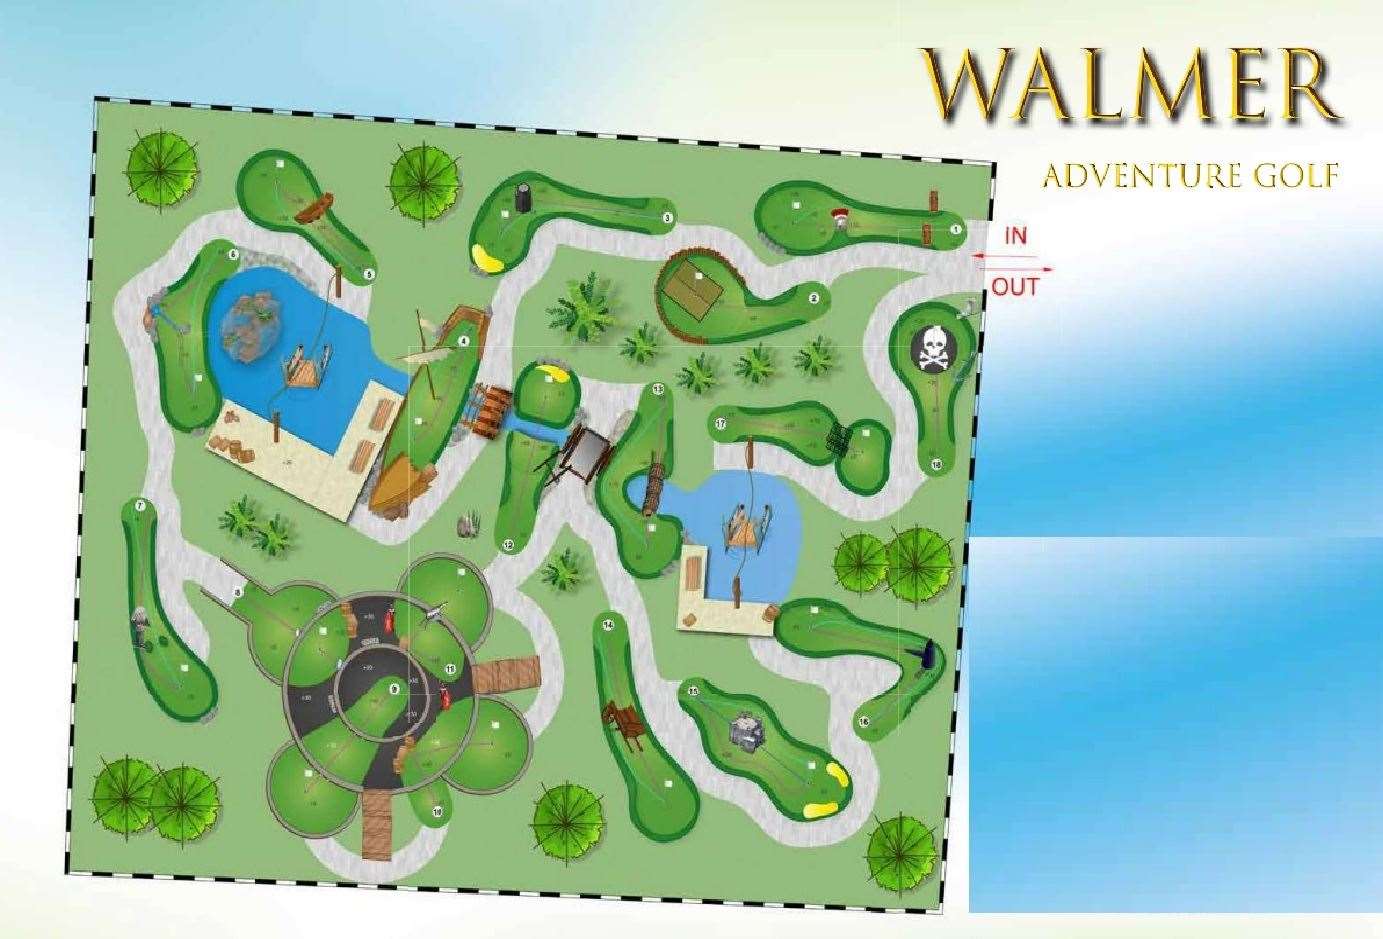 The attraction will feature 18 holes